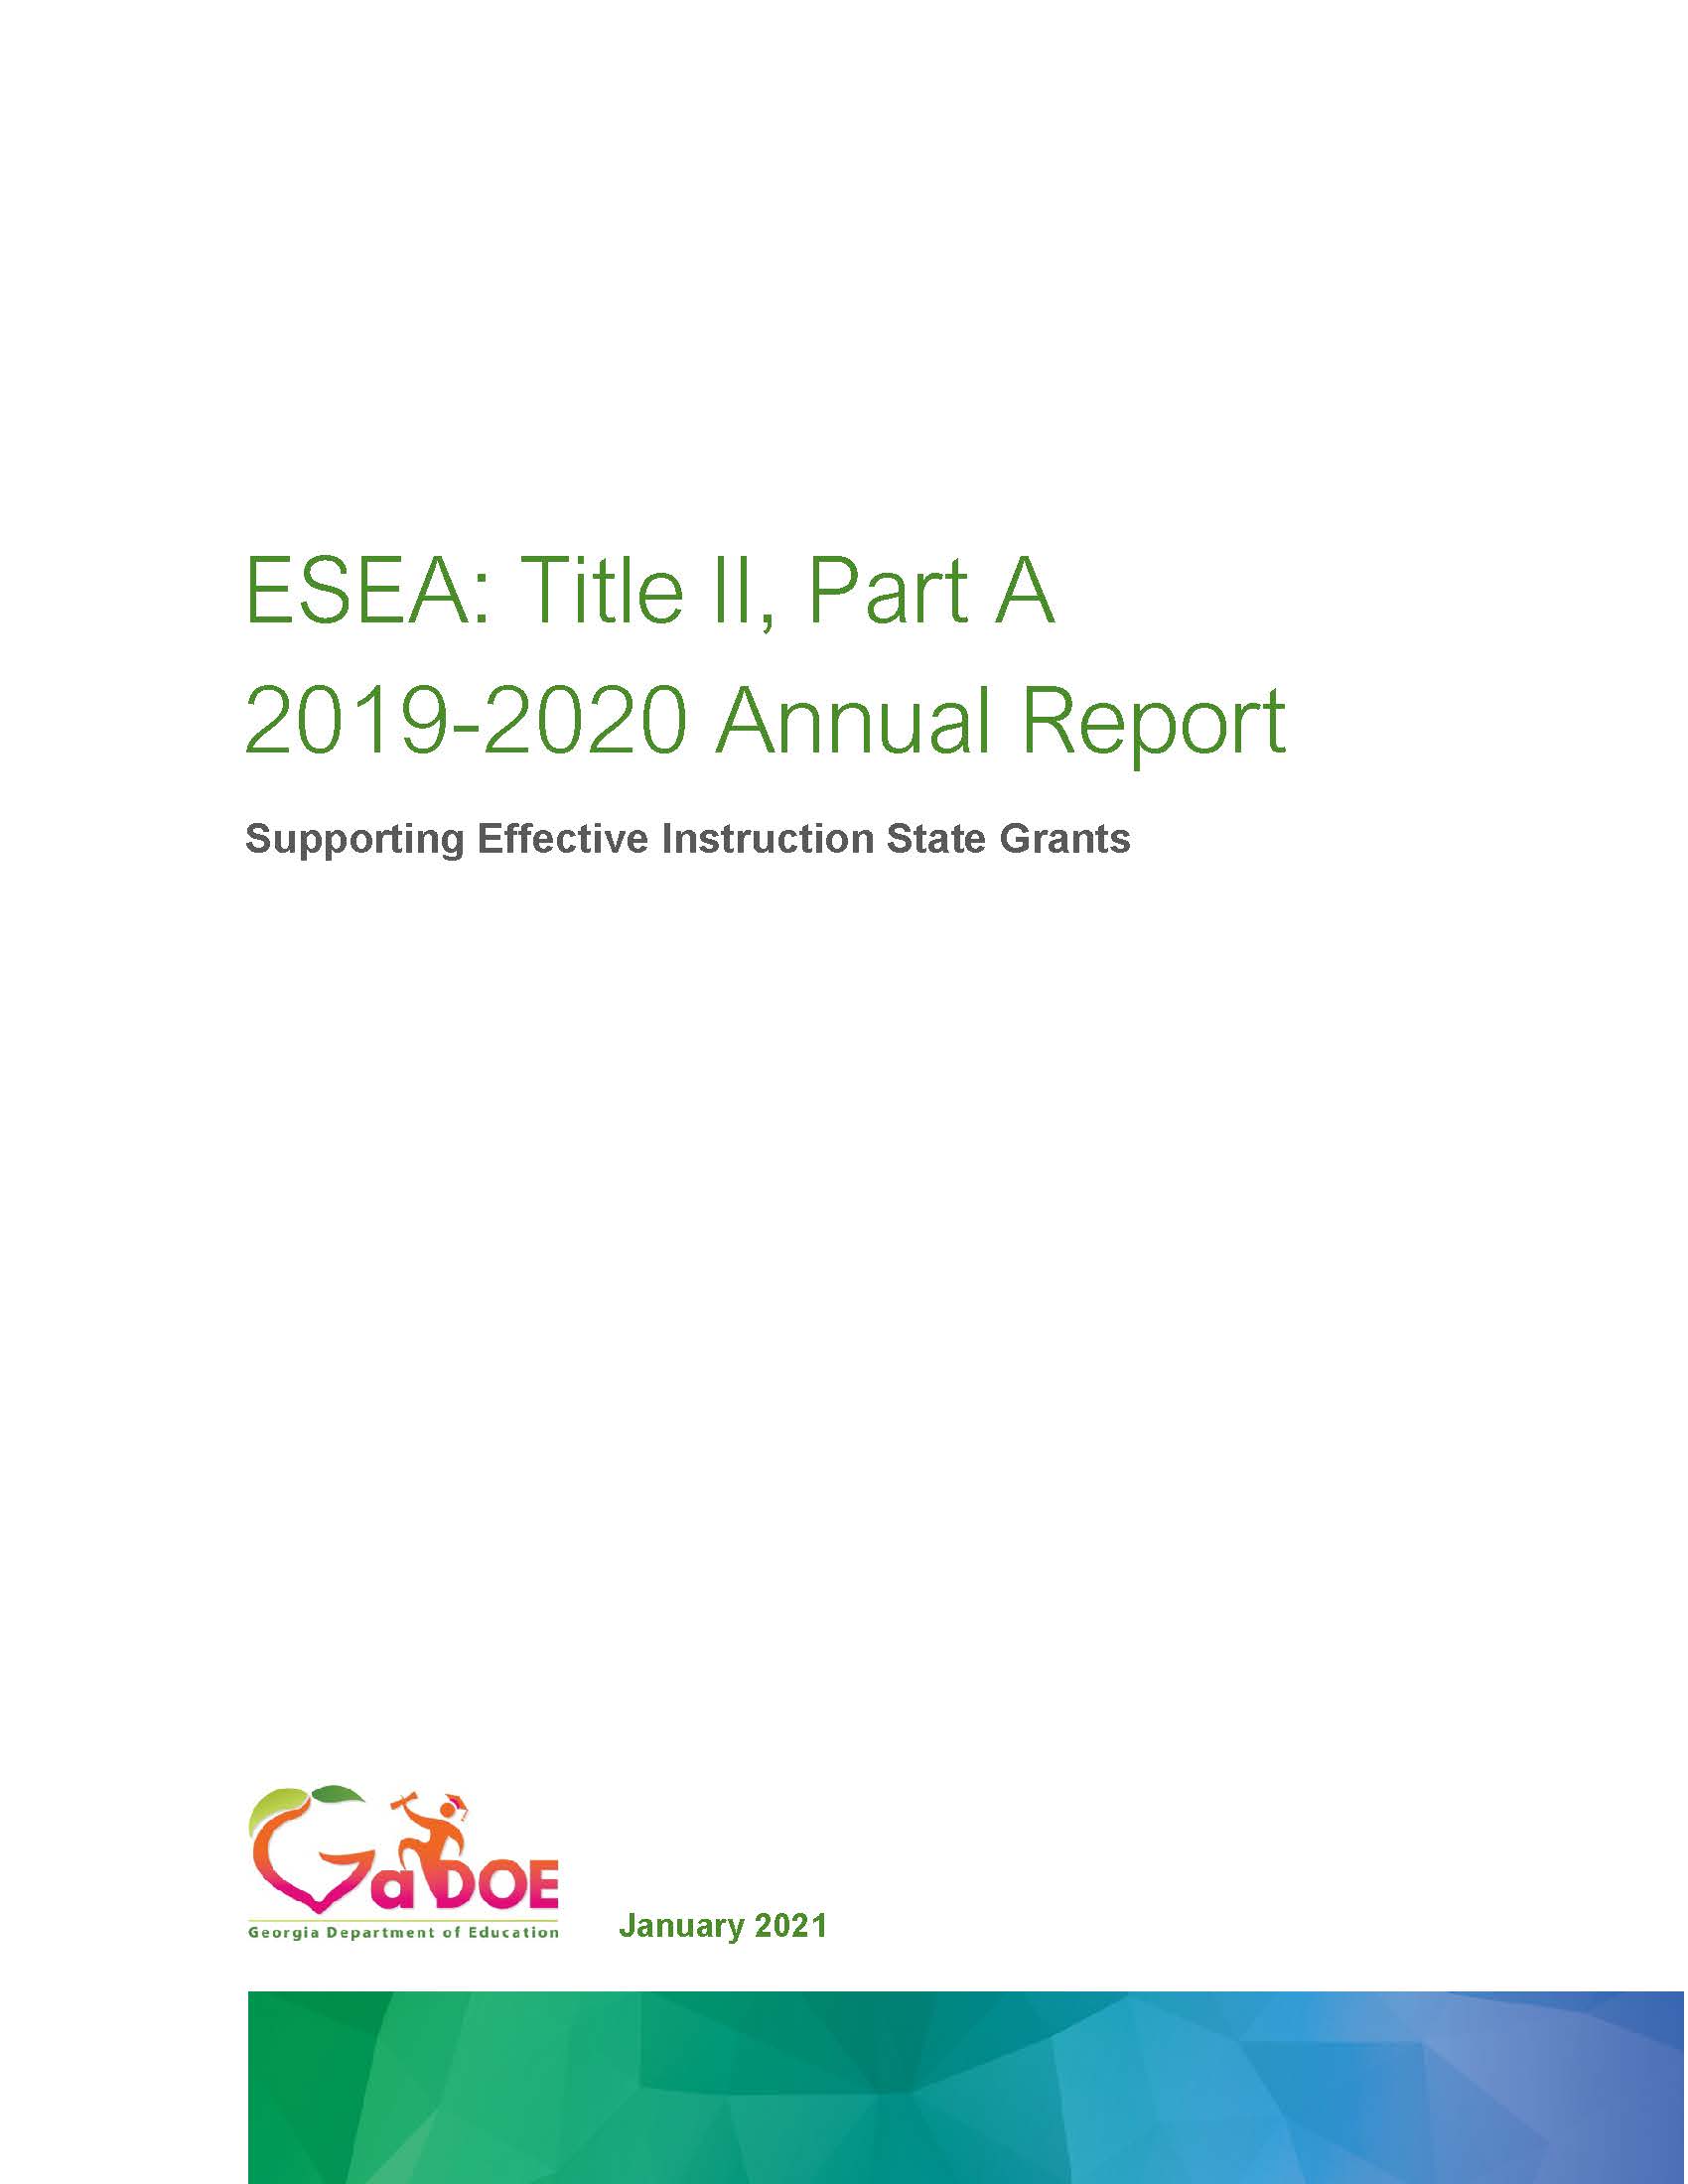 Image of the front page of the SY219-2020 Title II, Part A Annual Report